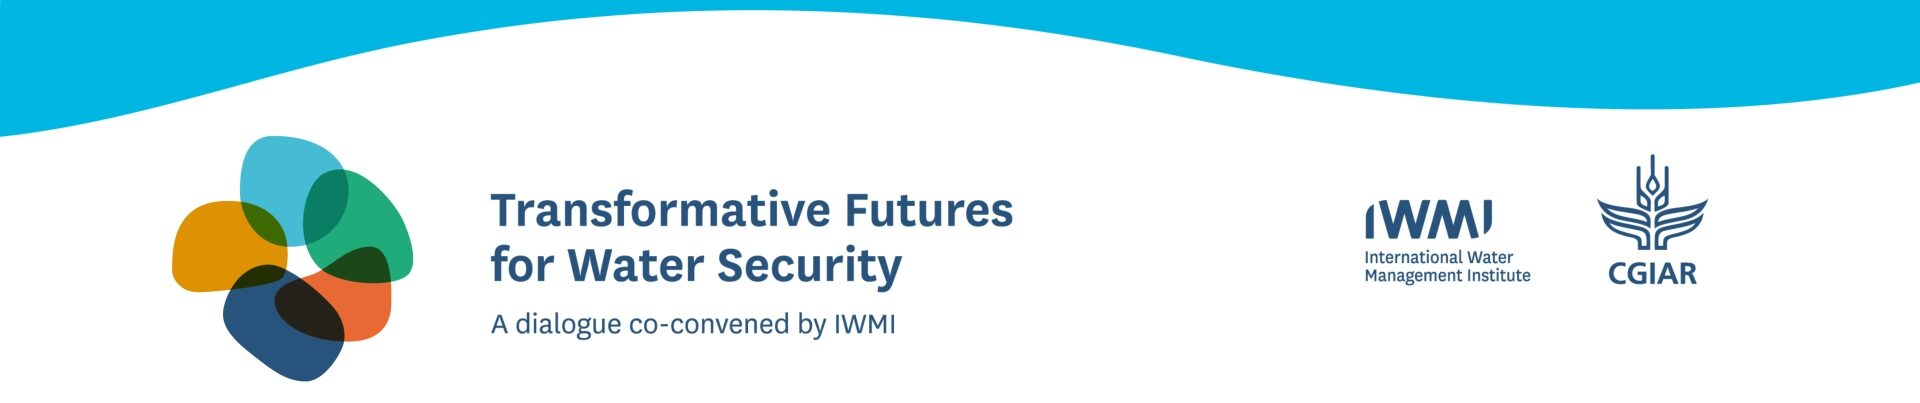 Transformative Futures for Water Security (TFWS)